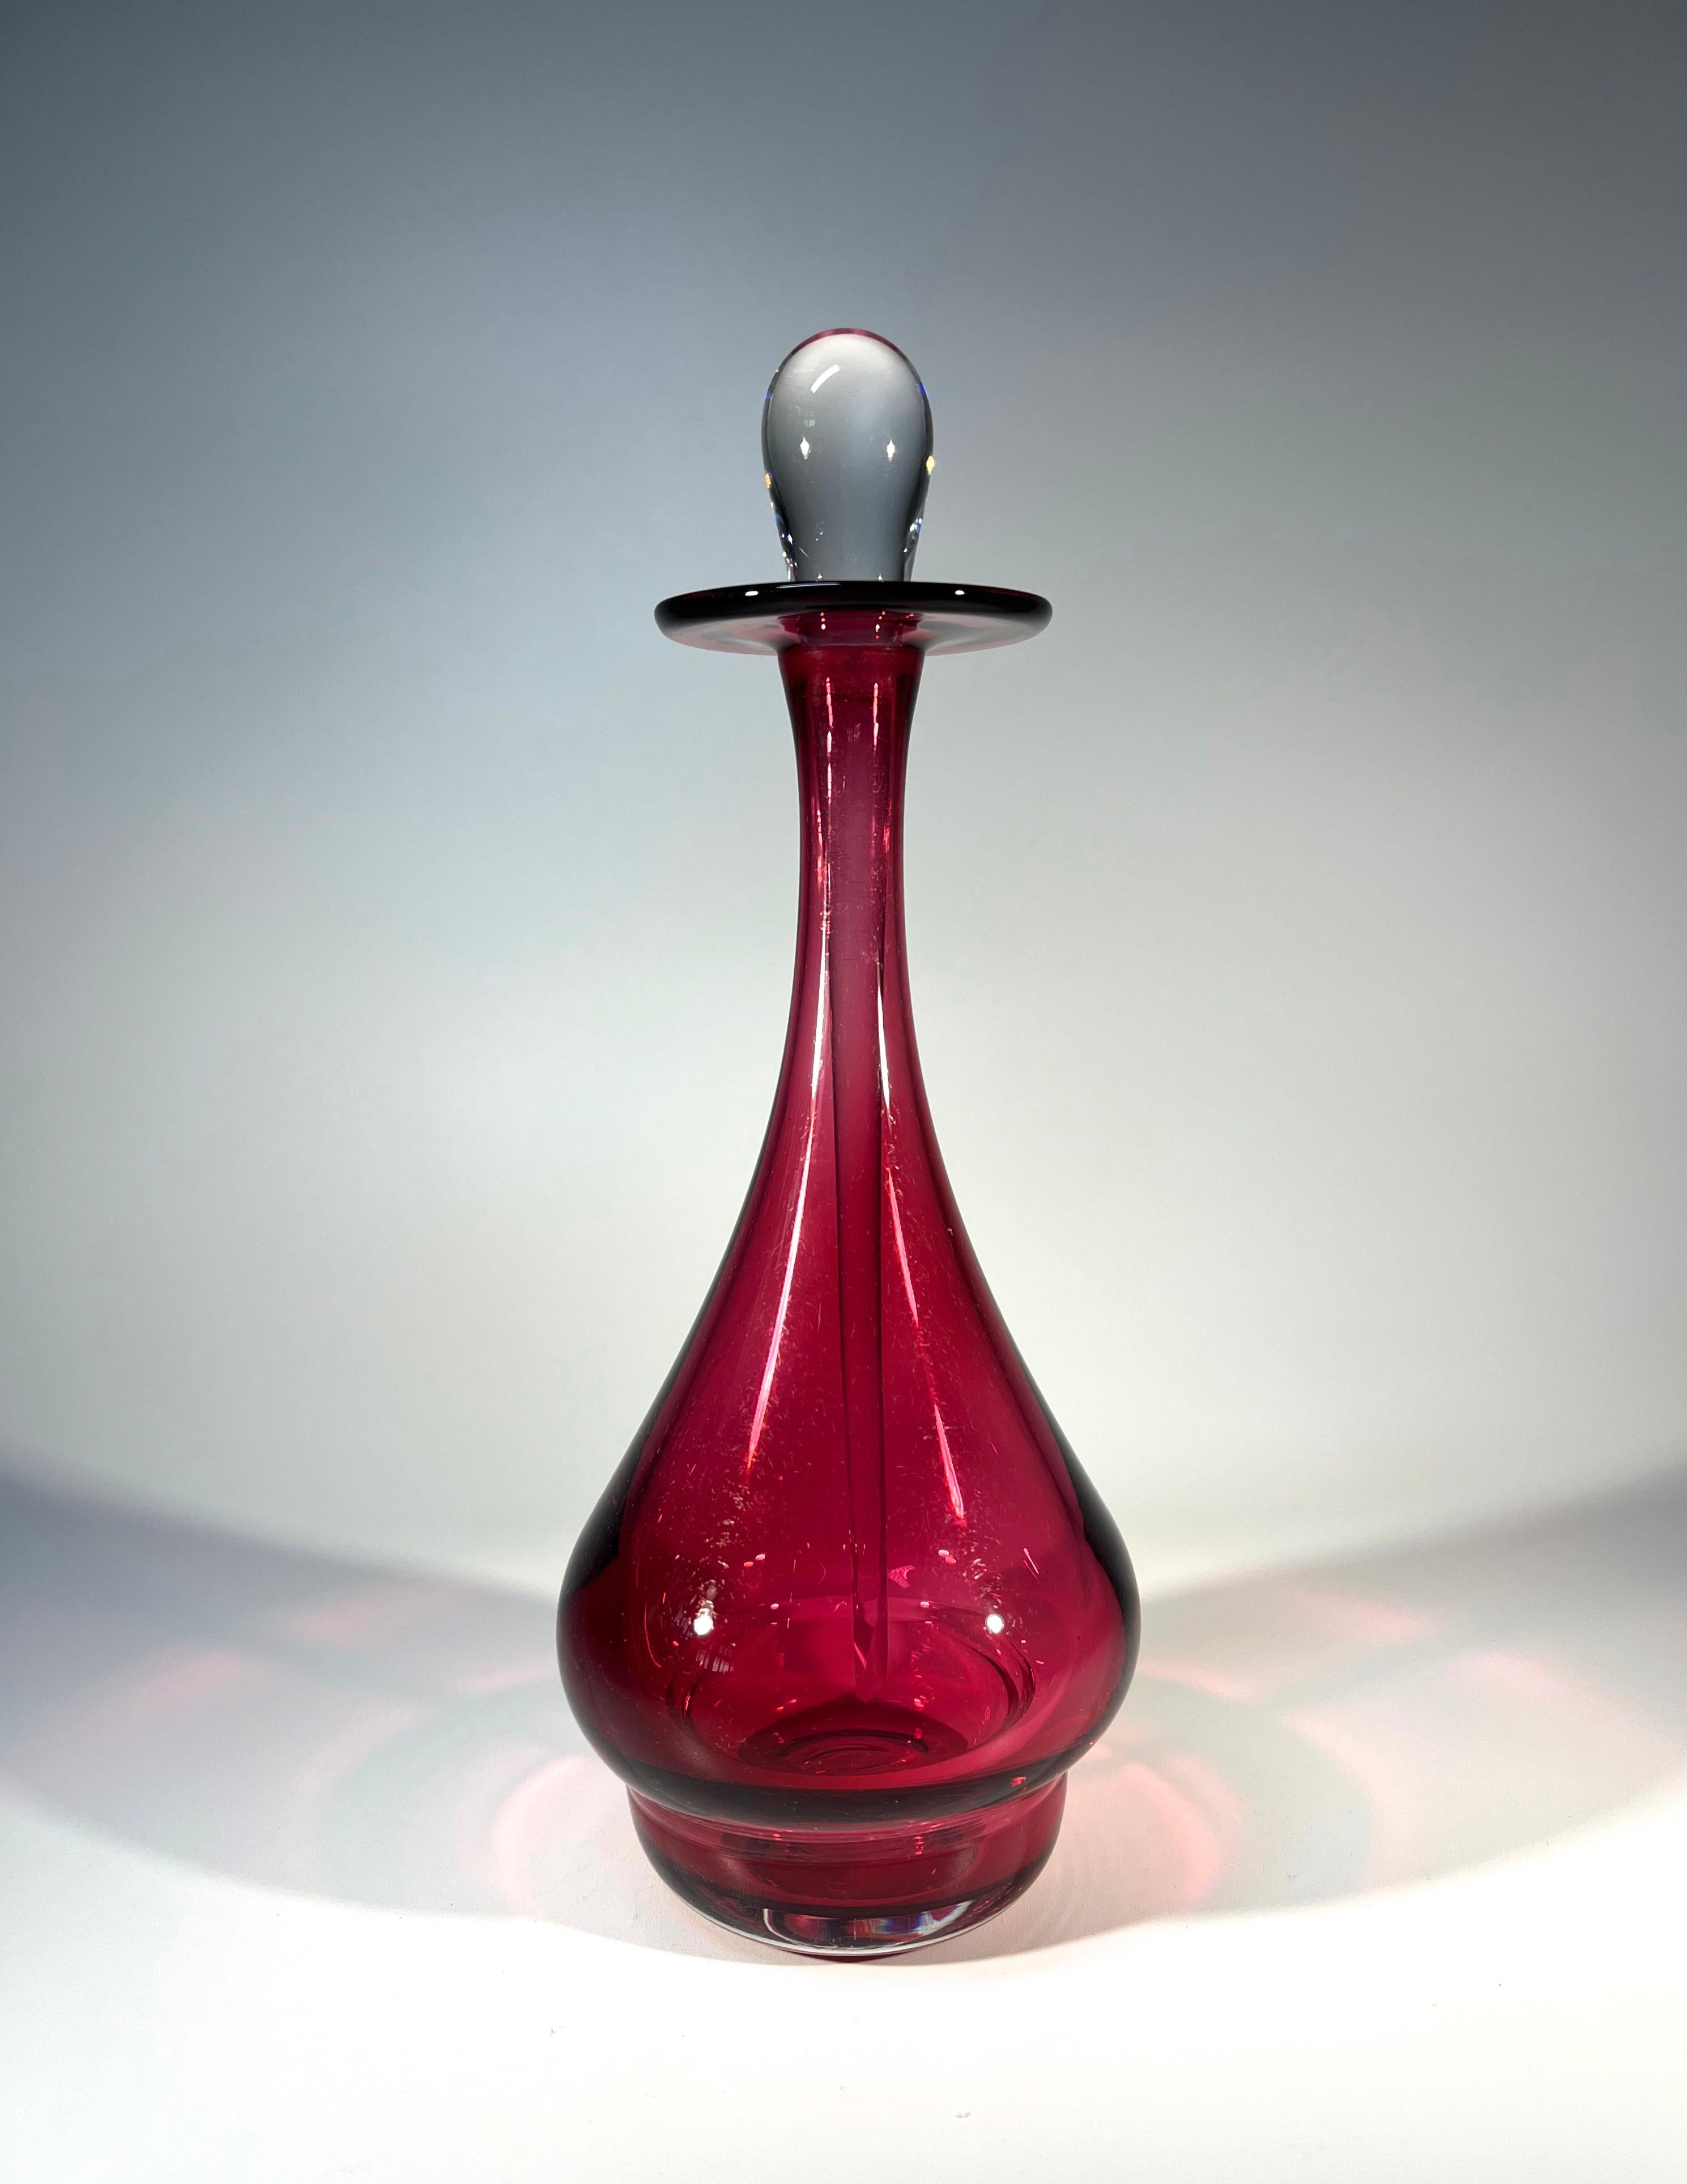 Delicious Raspberry pink glass perfume bottle, traditionally hand crafted by Bristol Glass, England
Beautifully shaped bottle with a fabulous elongated clear dropper spear
An elegant and desirable bottle
Circa 2000
Height 7.5 inch, Diameter